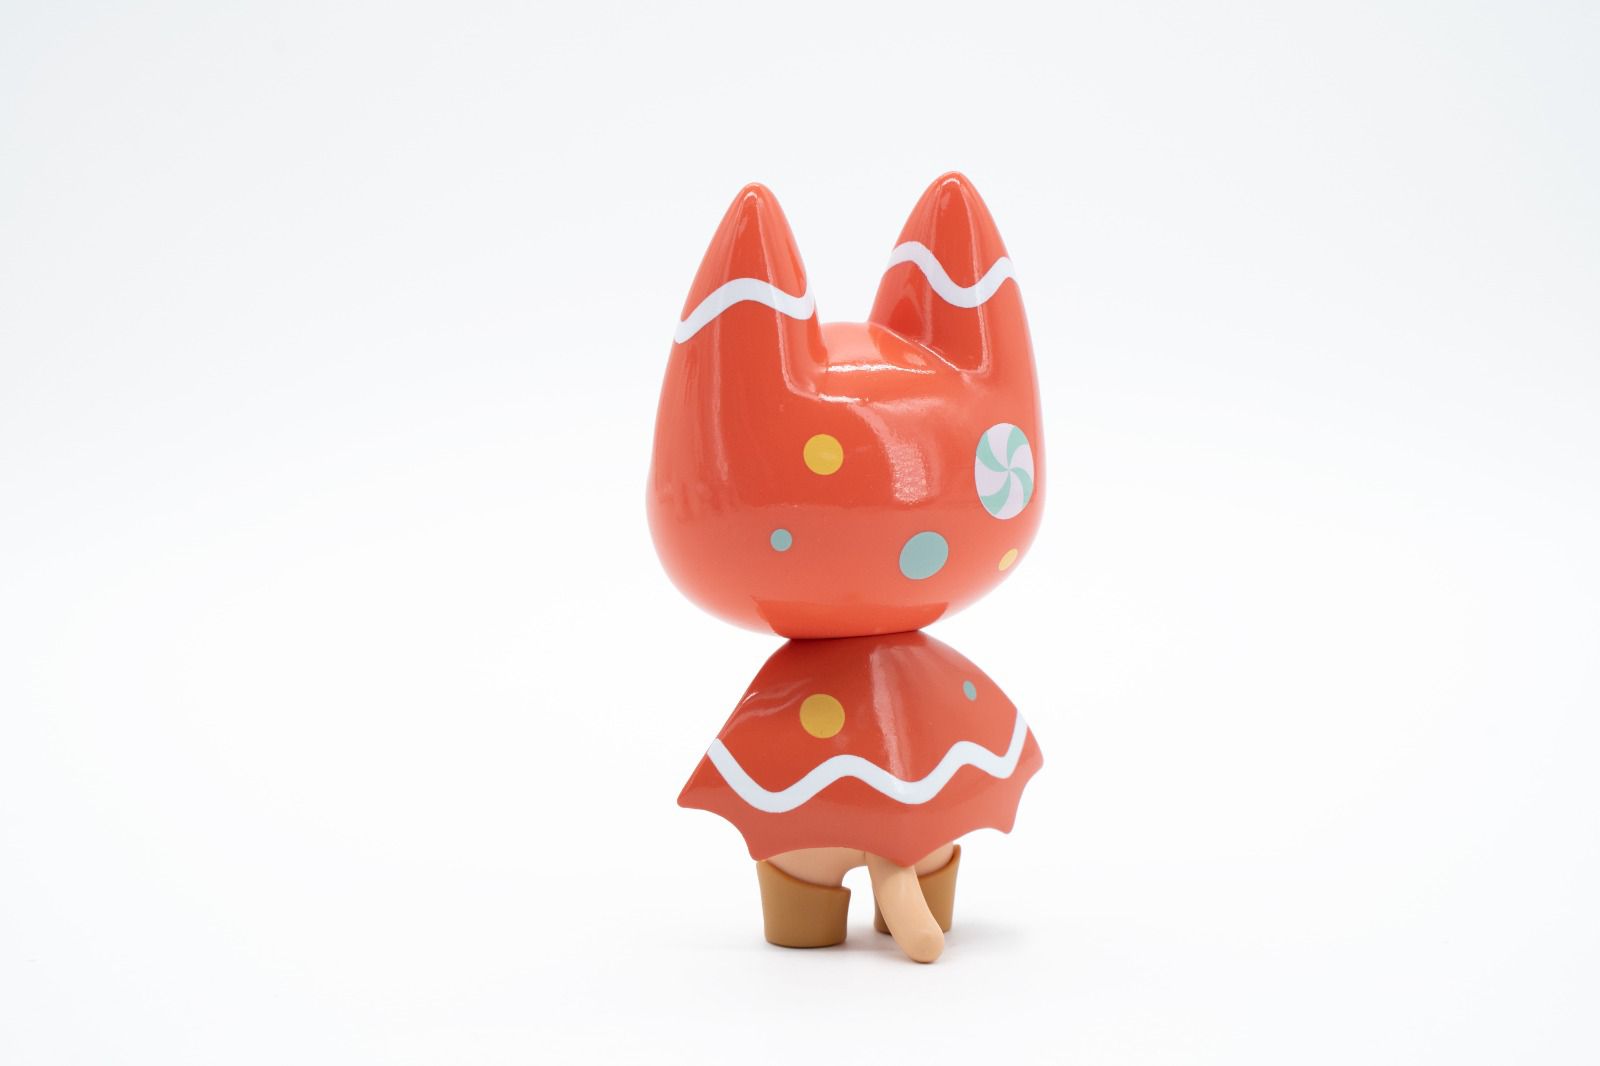 BAD MEAW 'GINGERBREAD' EDITION - Toy Soul Exclusive